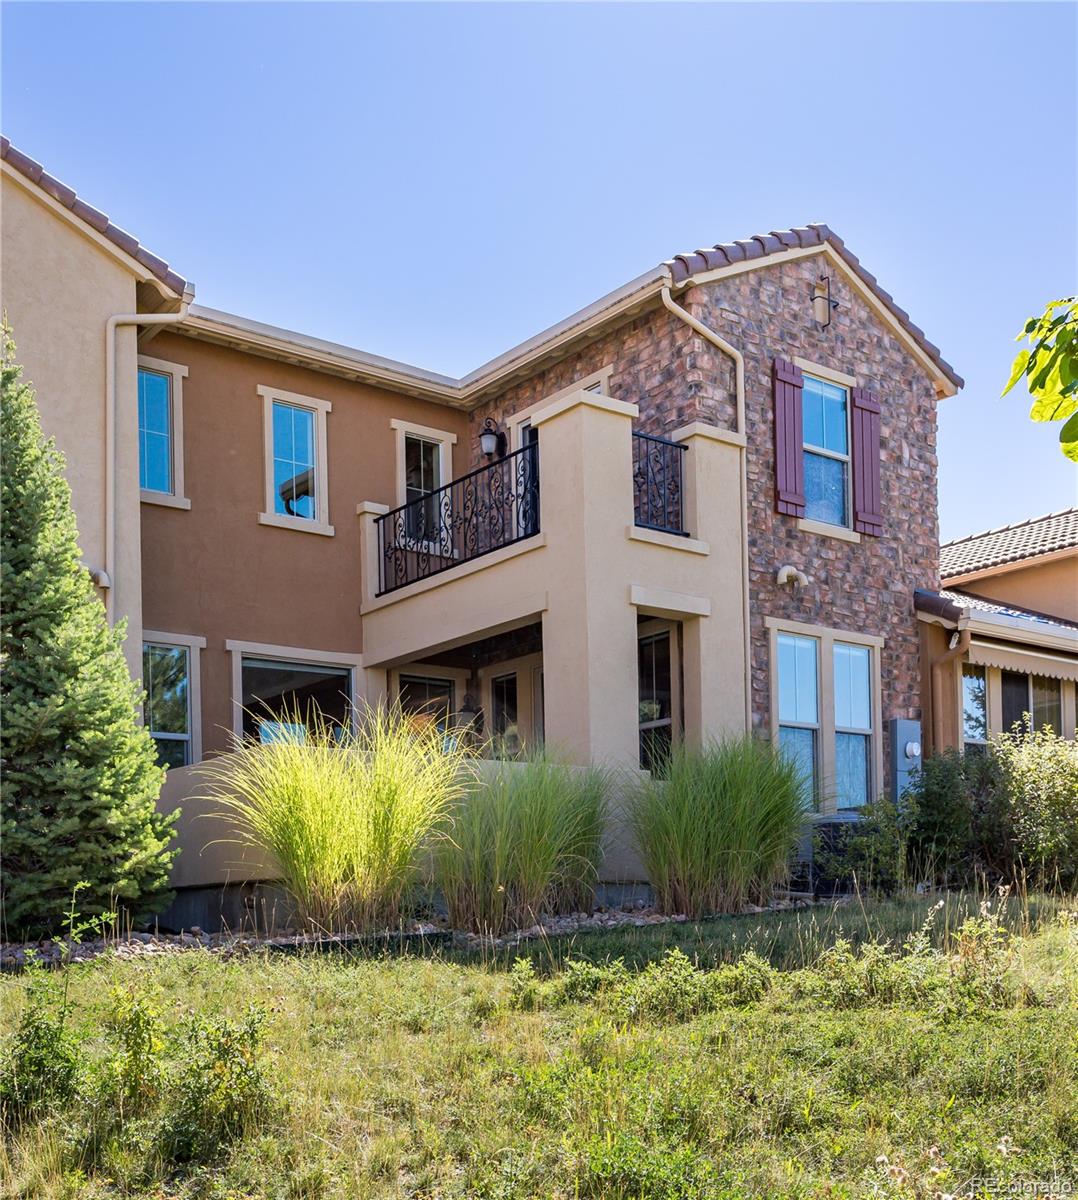 9600  firenze way, Highlands Ranch sold home. Closed on 2024-03-14 for $724,000.